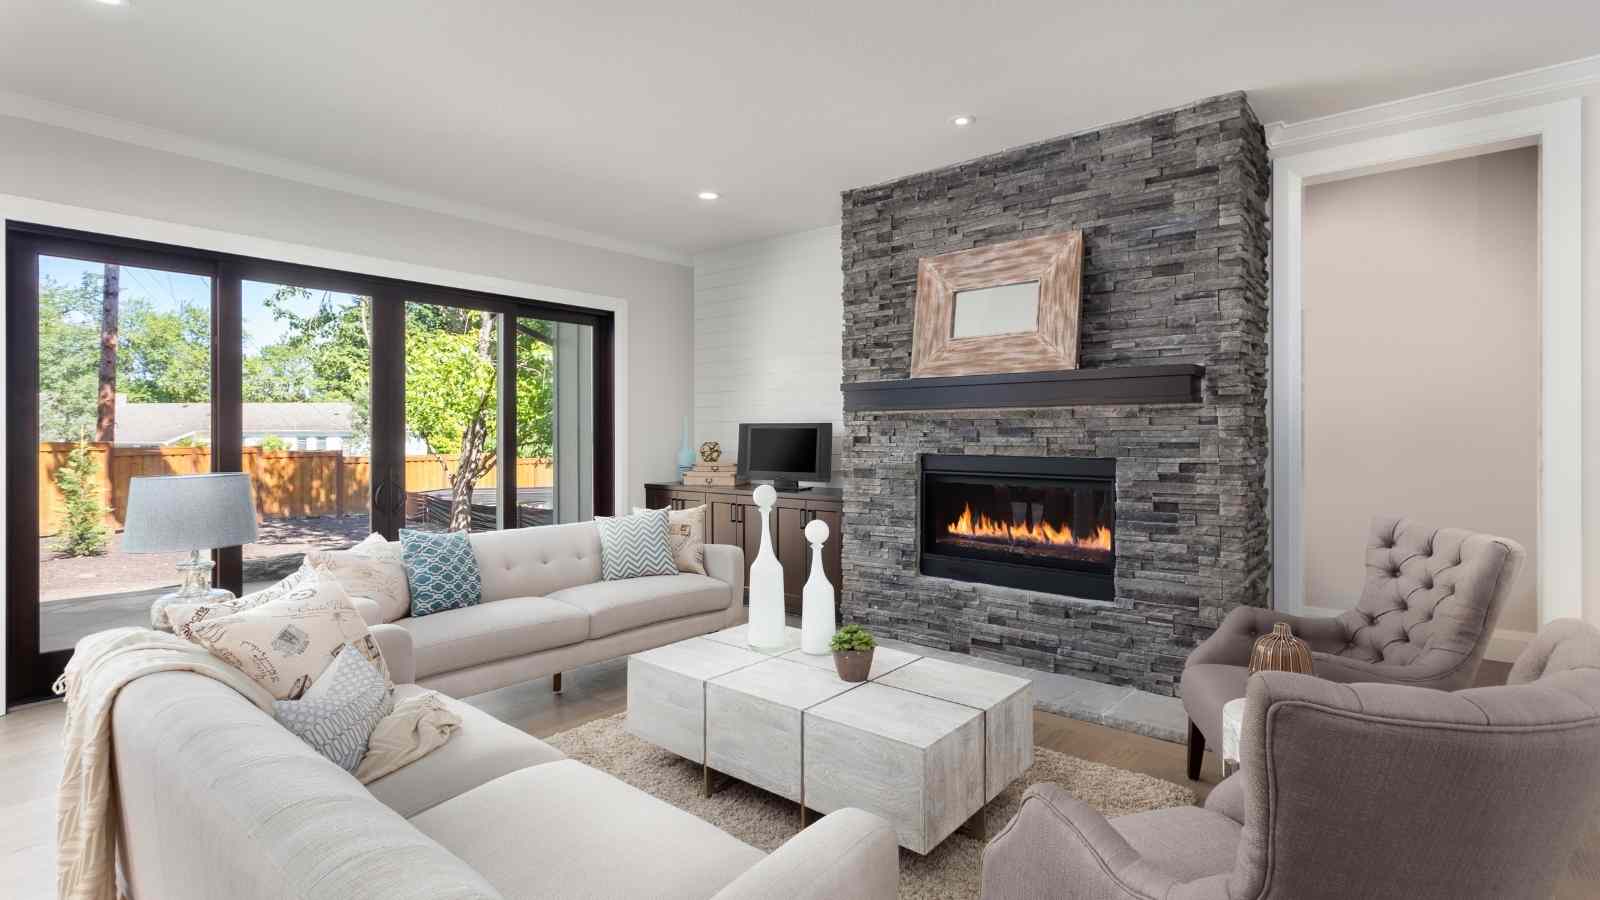 fireplace in your home